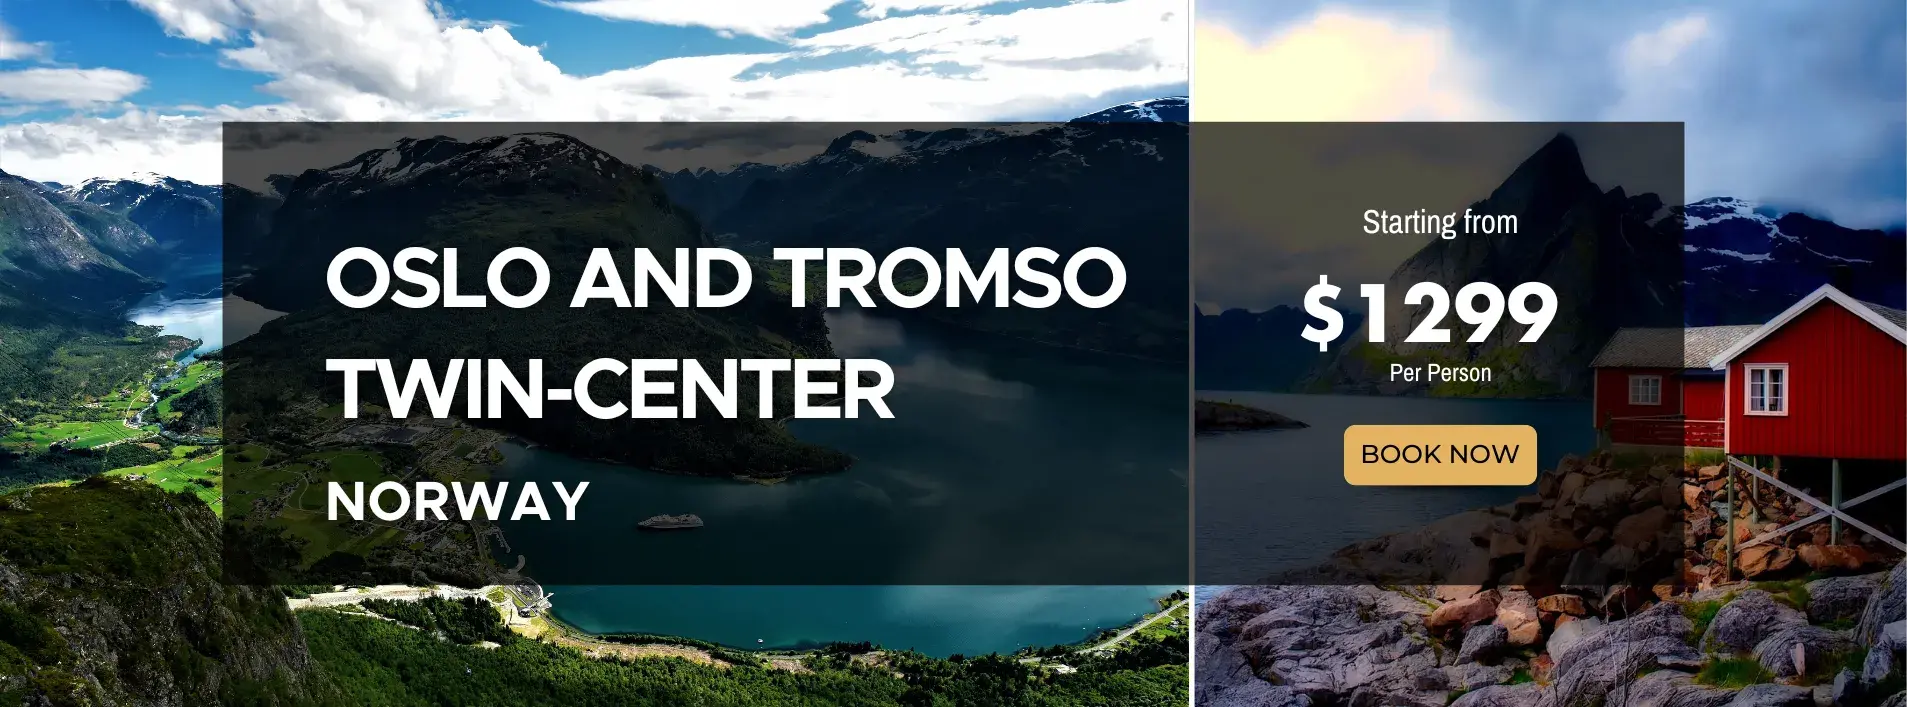 Oslo and Tromso Twin-Center W/Flights and Tours